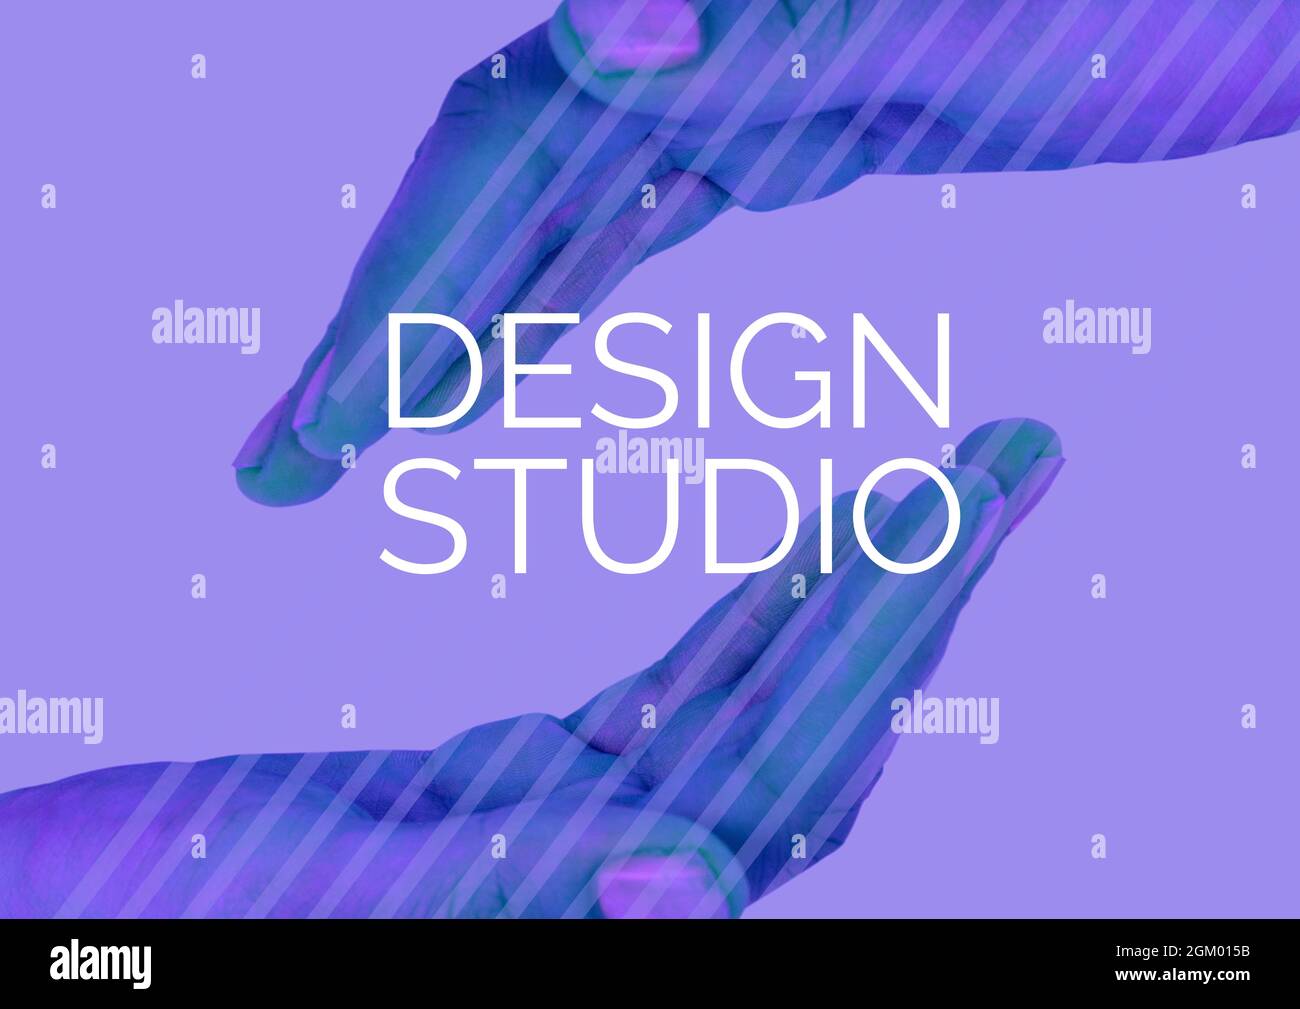 Digitally generated image of design studio text over two hands against purple background Stock Photo